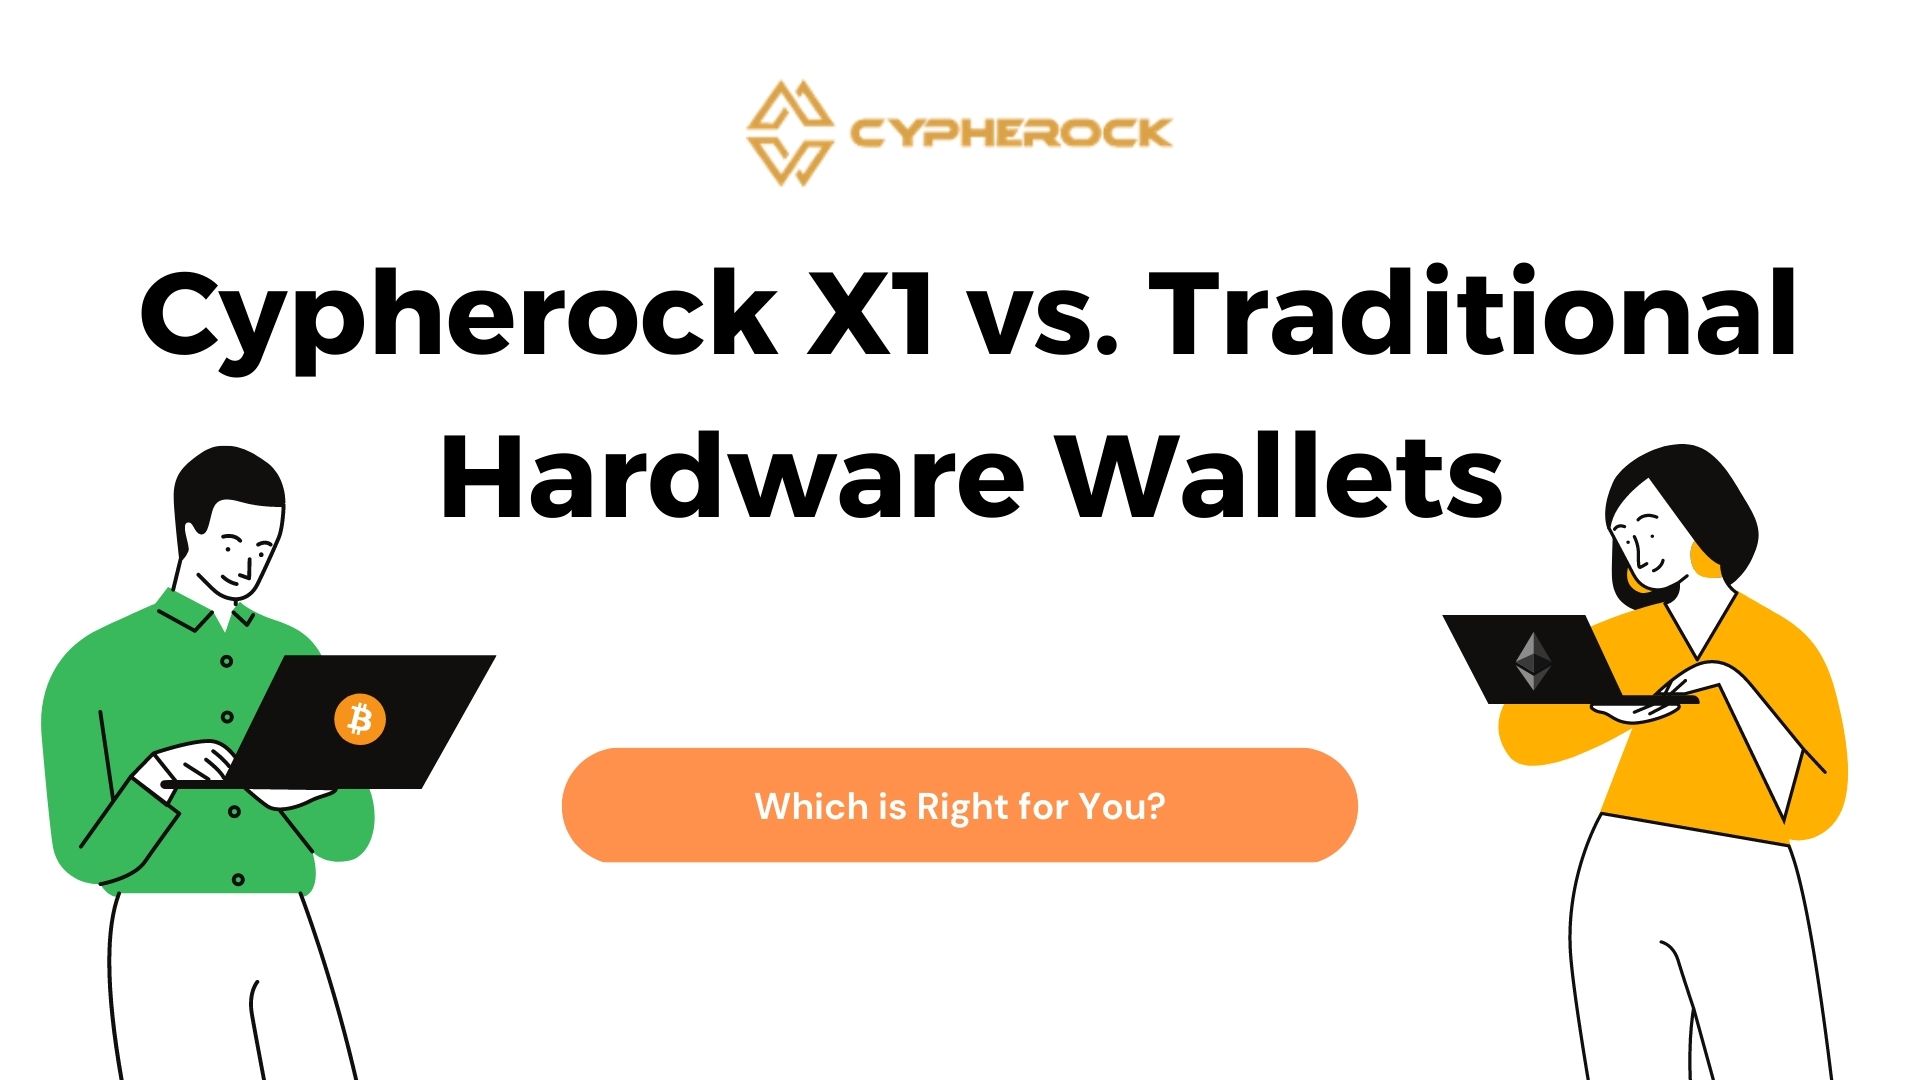 Cypherock X1 vs. Traditional Hardware Wallets: Which is Right for You